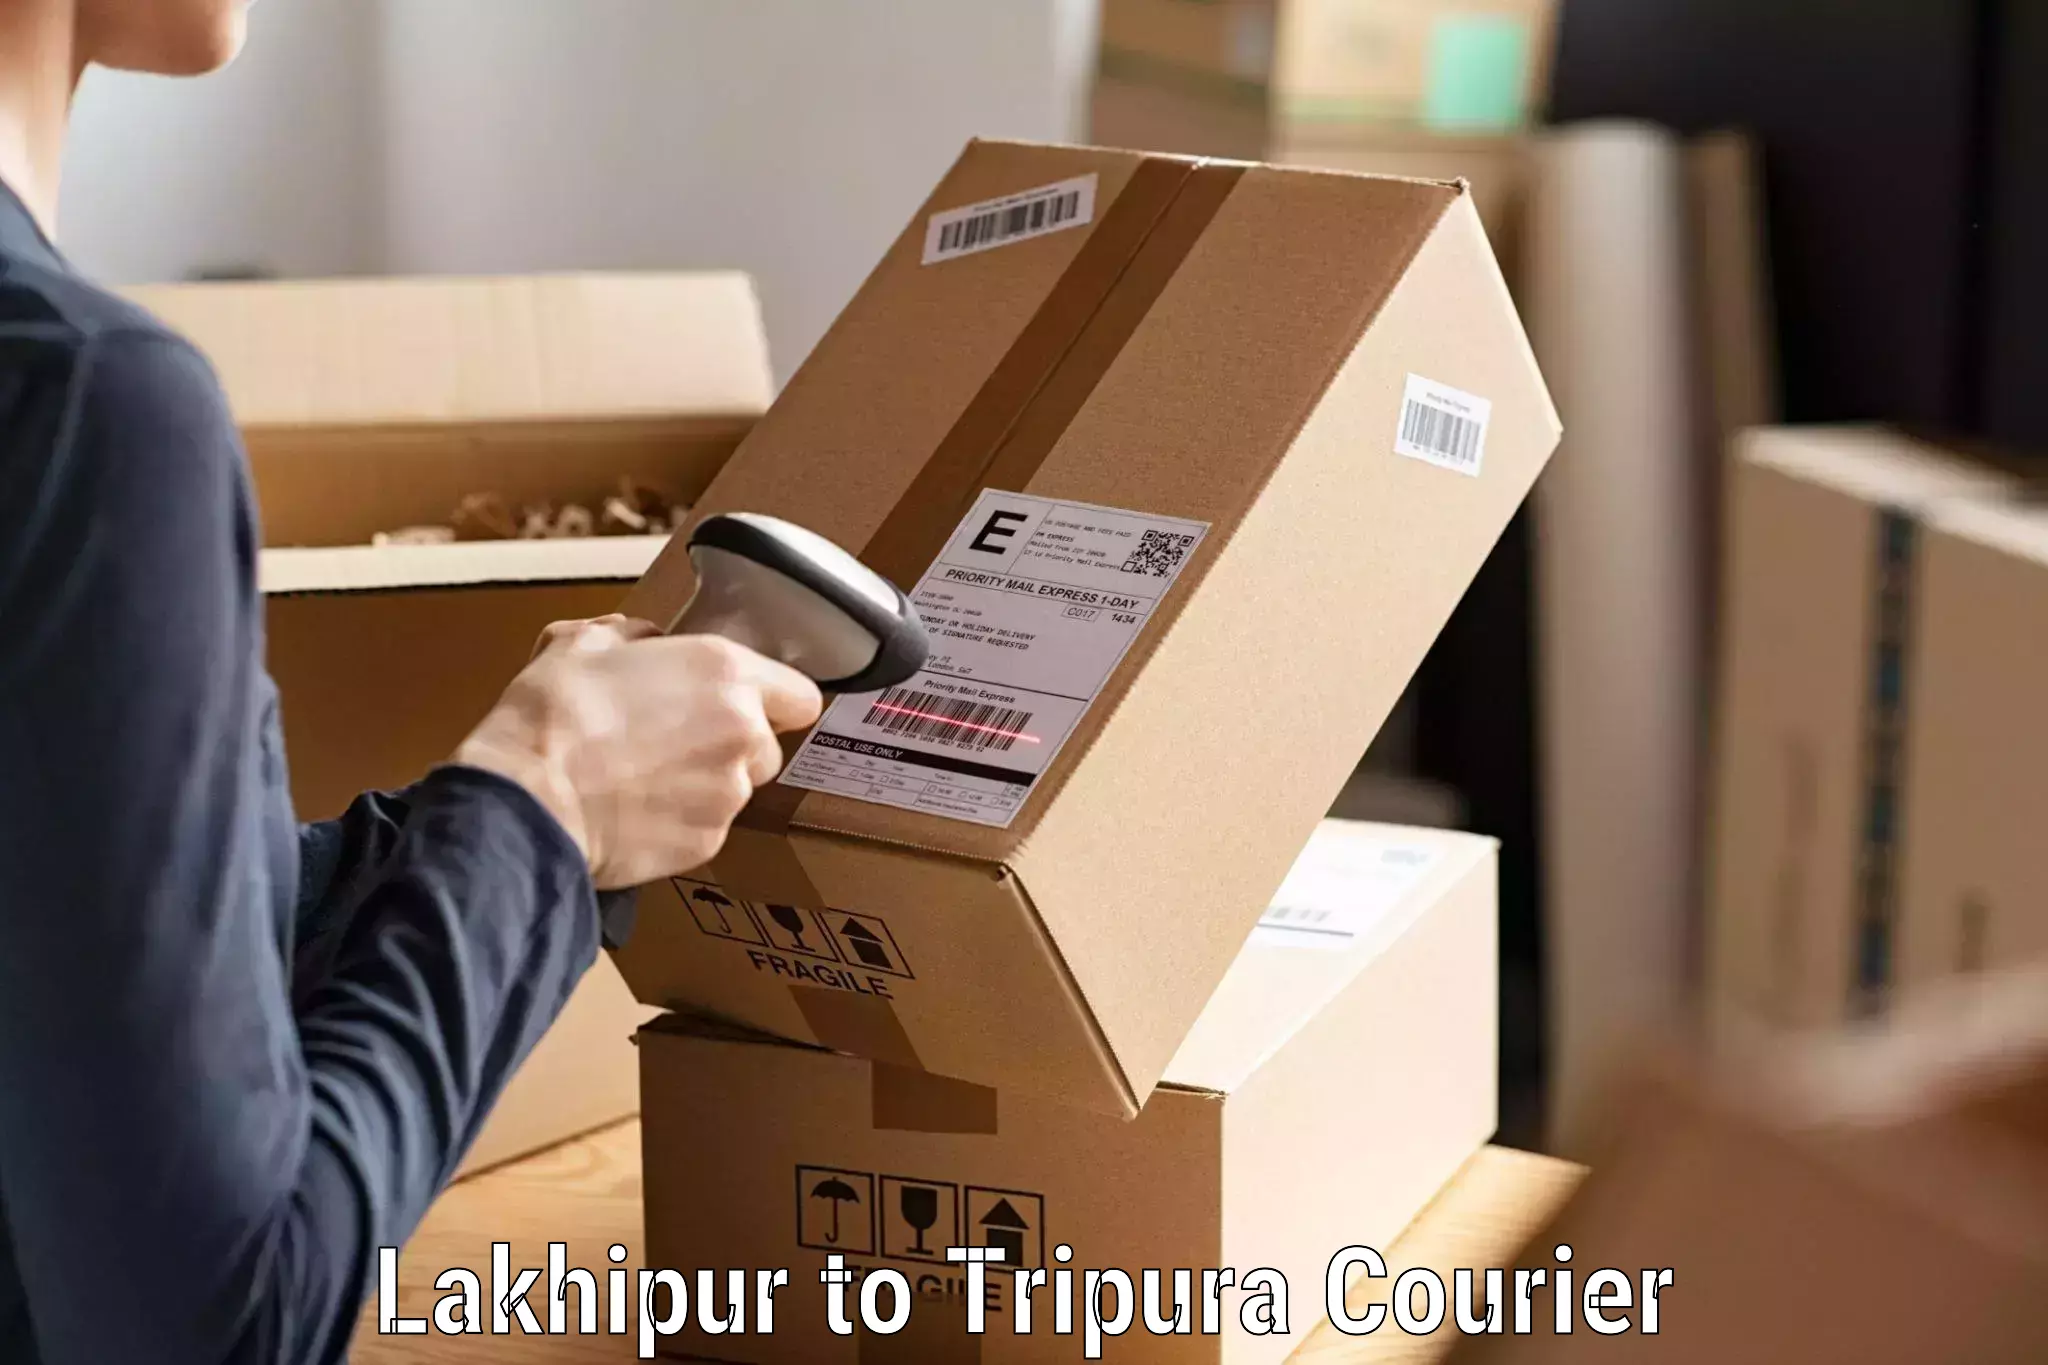 Tailored delivery services Lakhipur to Udaipur Tripura